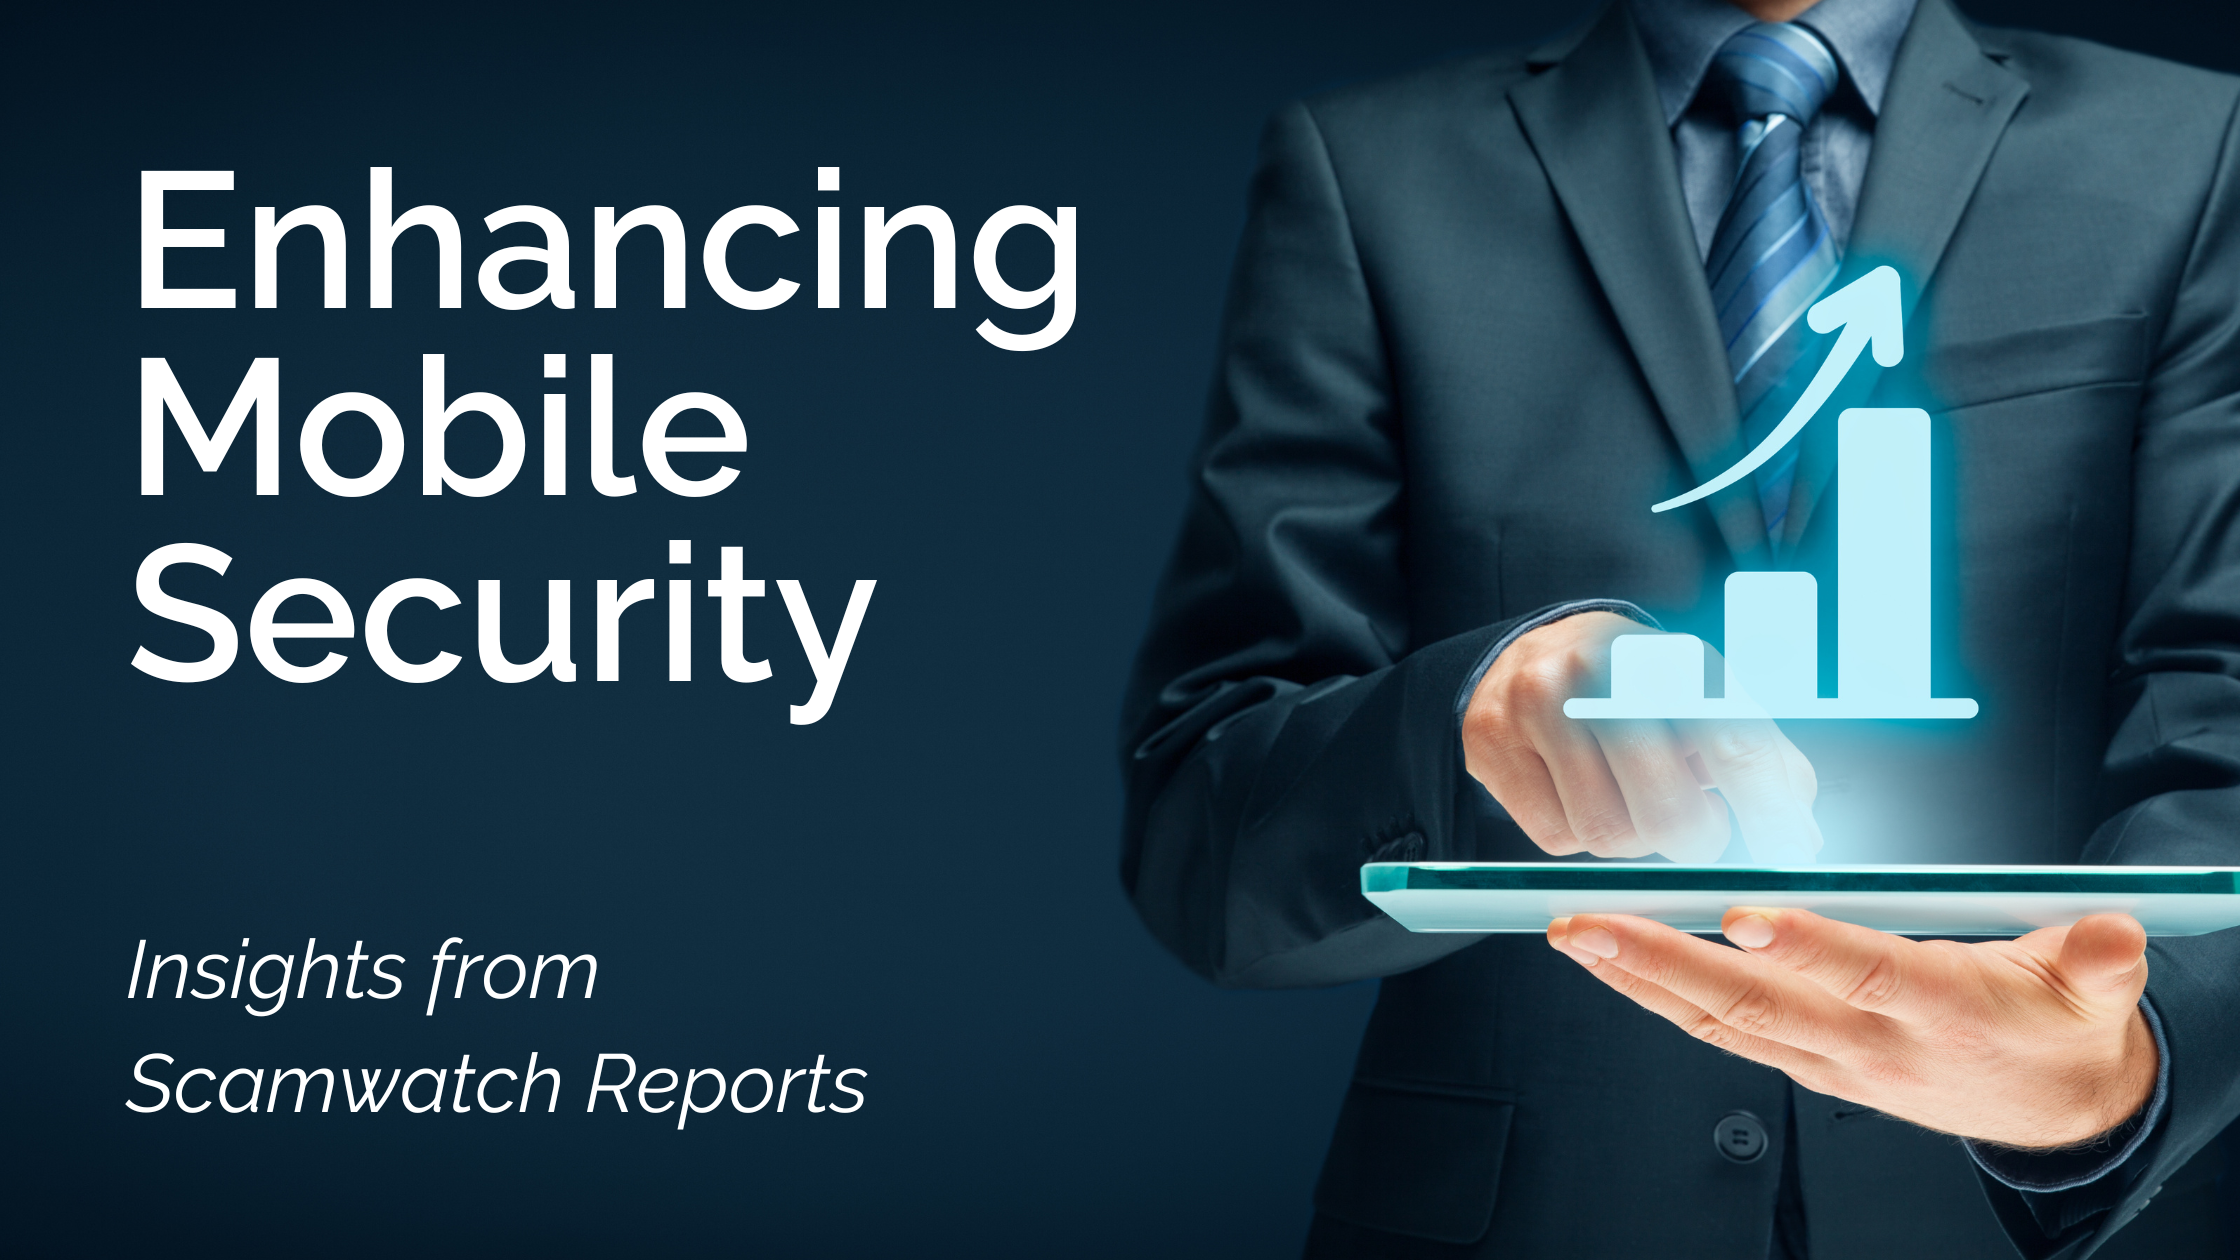 Enhancing Mobile Security: Insights from Scamwatch Reports